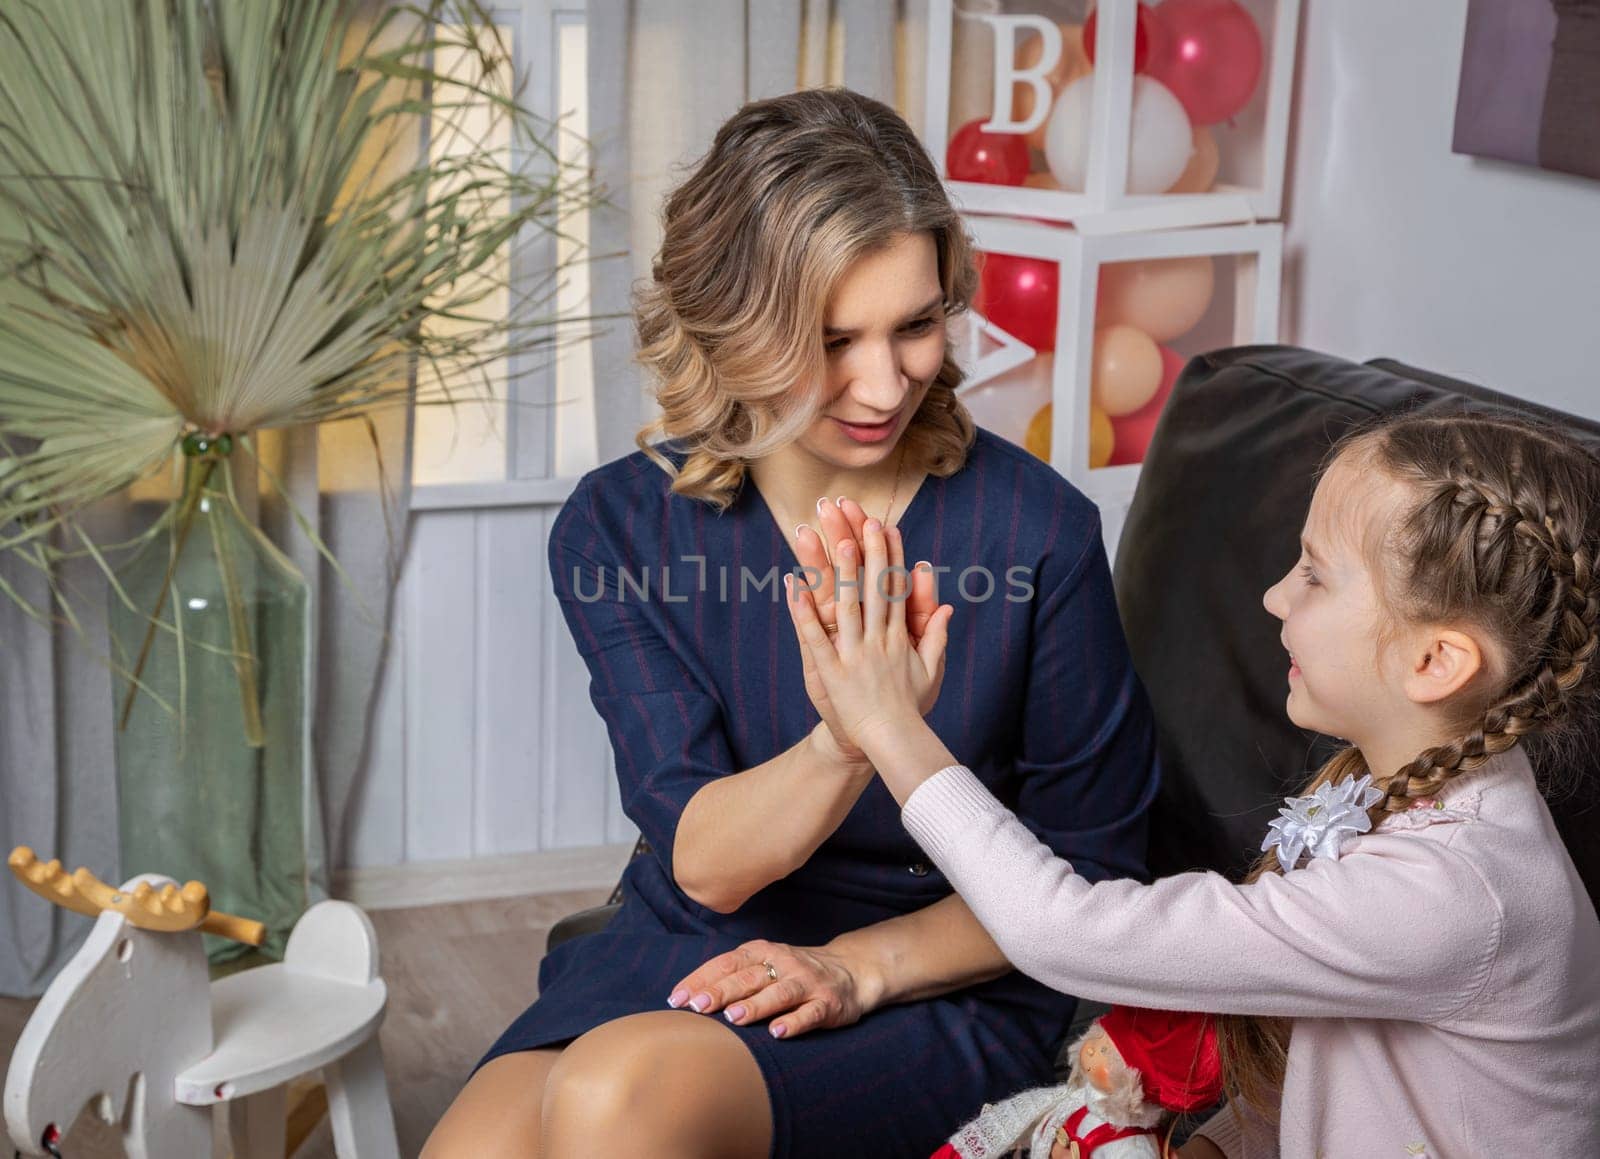 The girl psychologist and the child clap their hands at the successful resolution of the problem